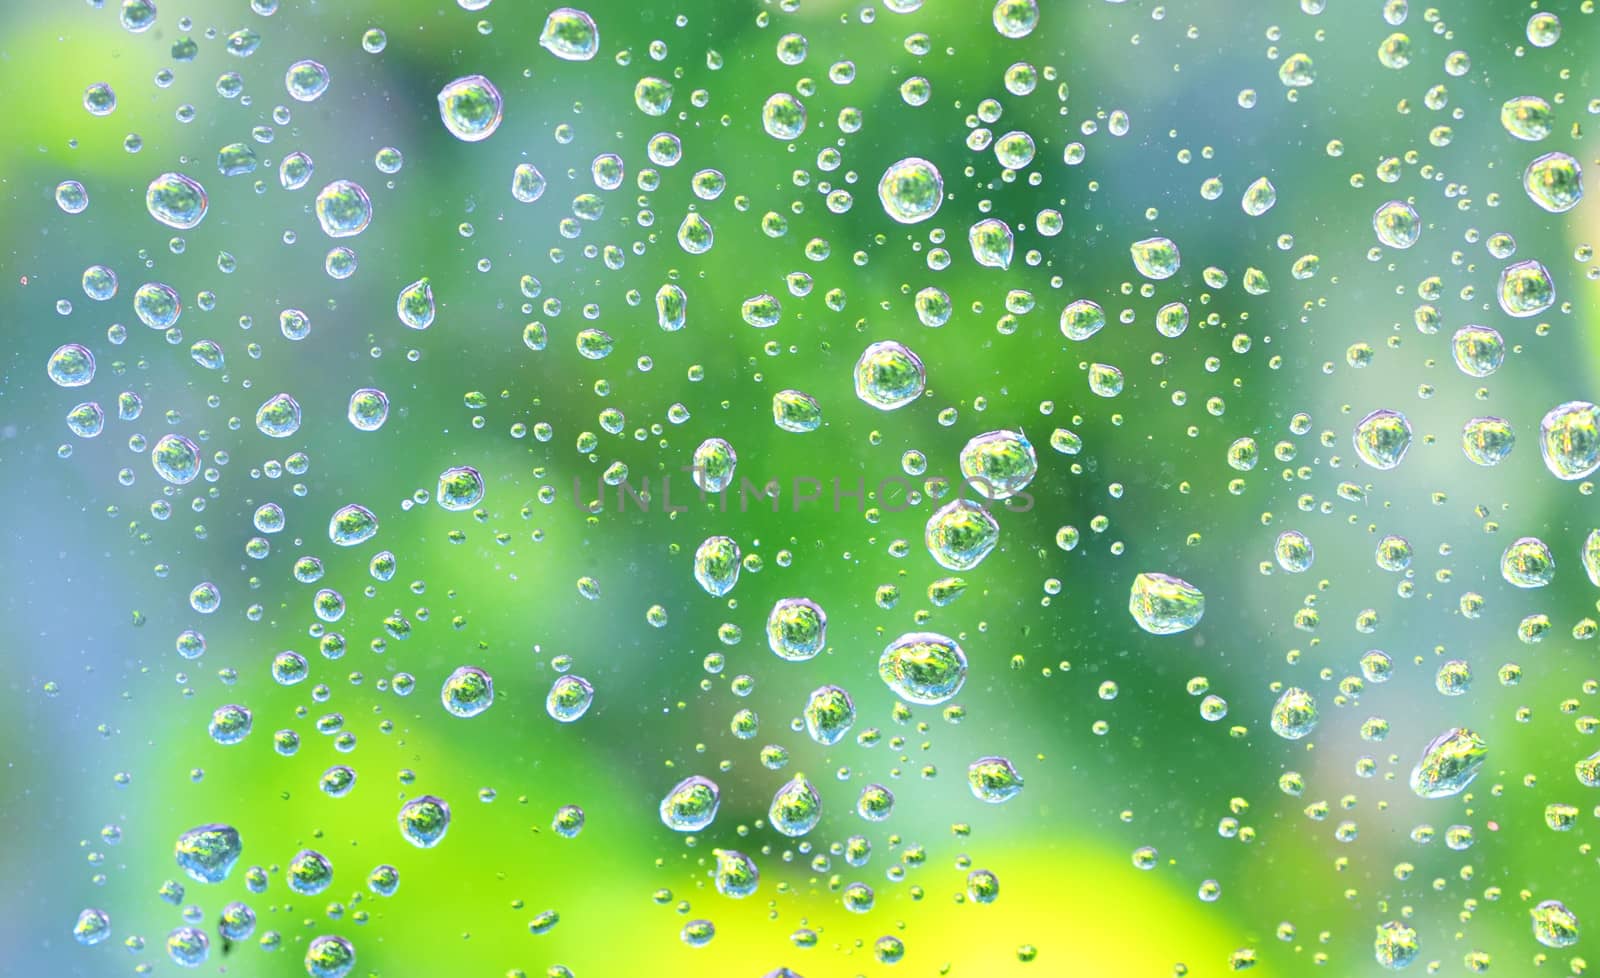 Drops of rain on the glass 